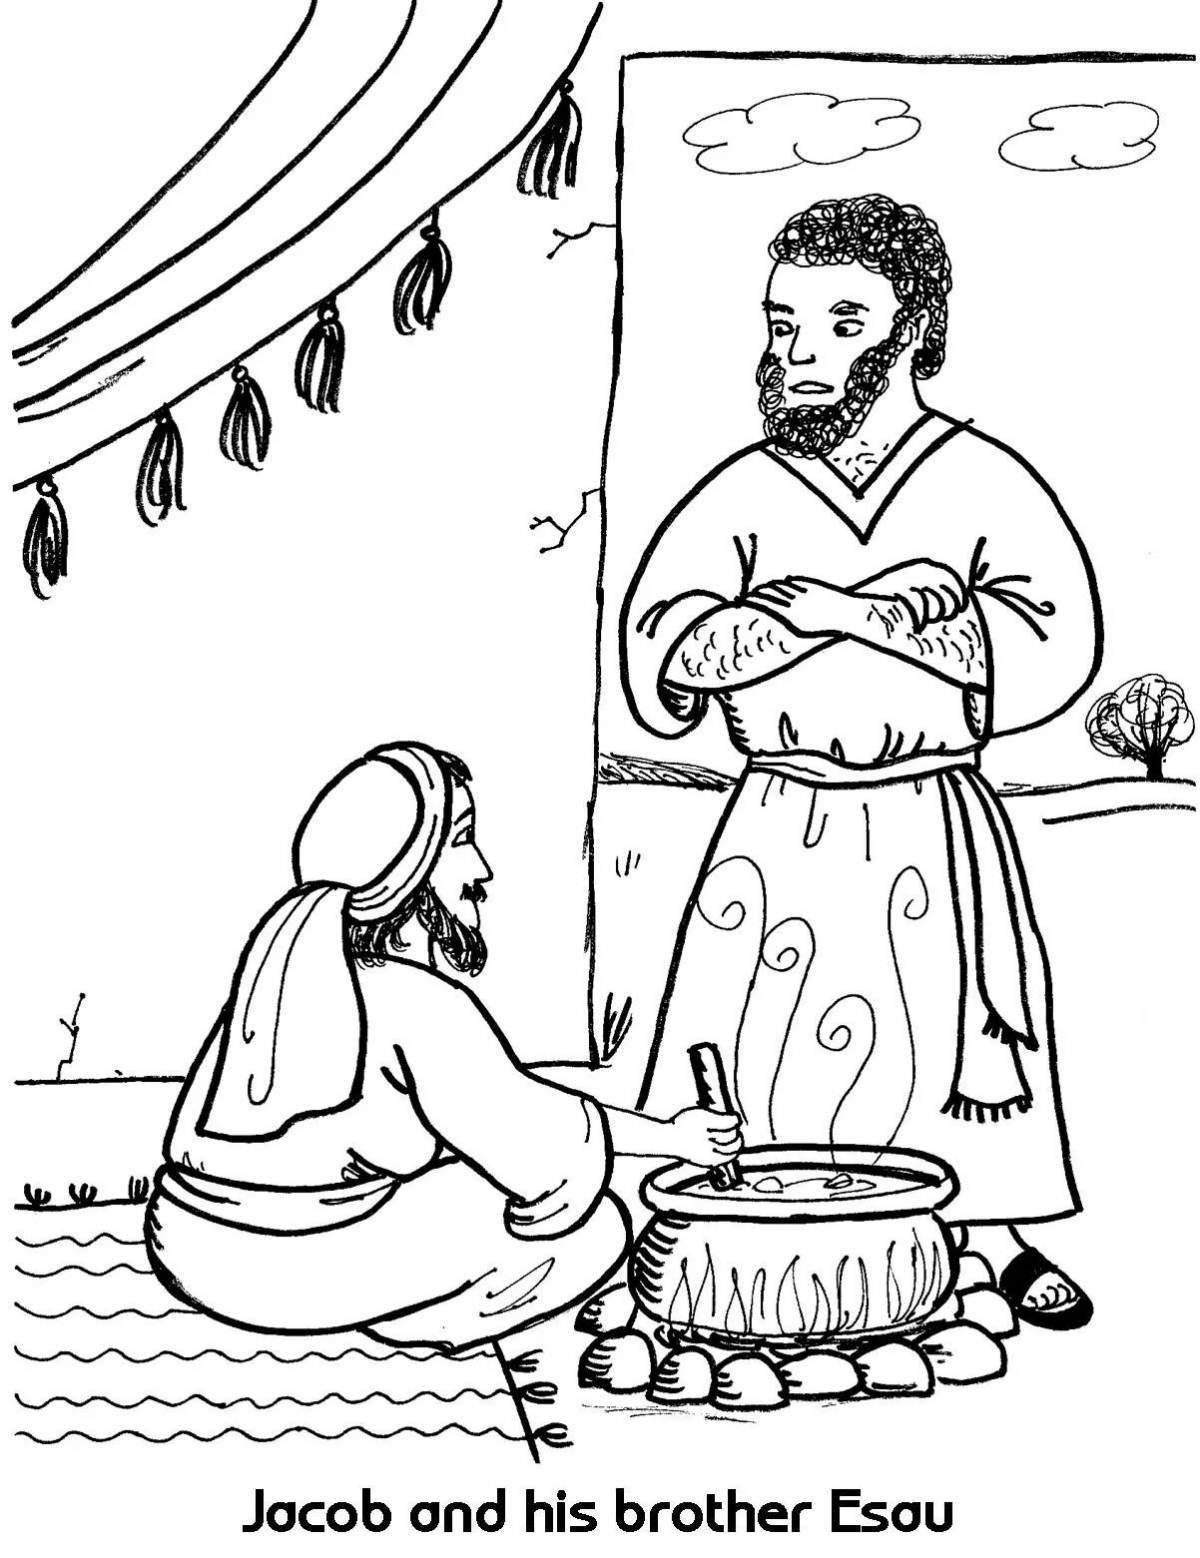 Coloring book shimmering Esau and Jacob